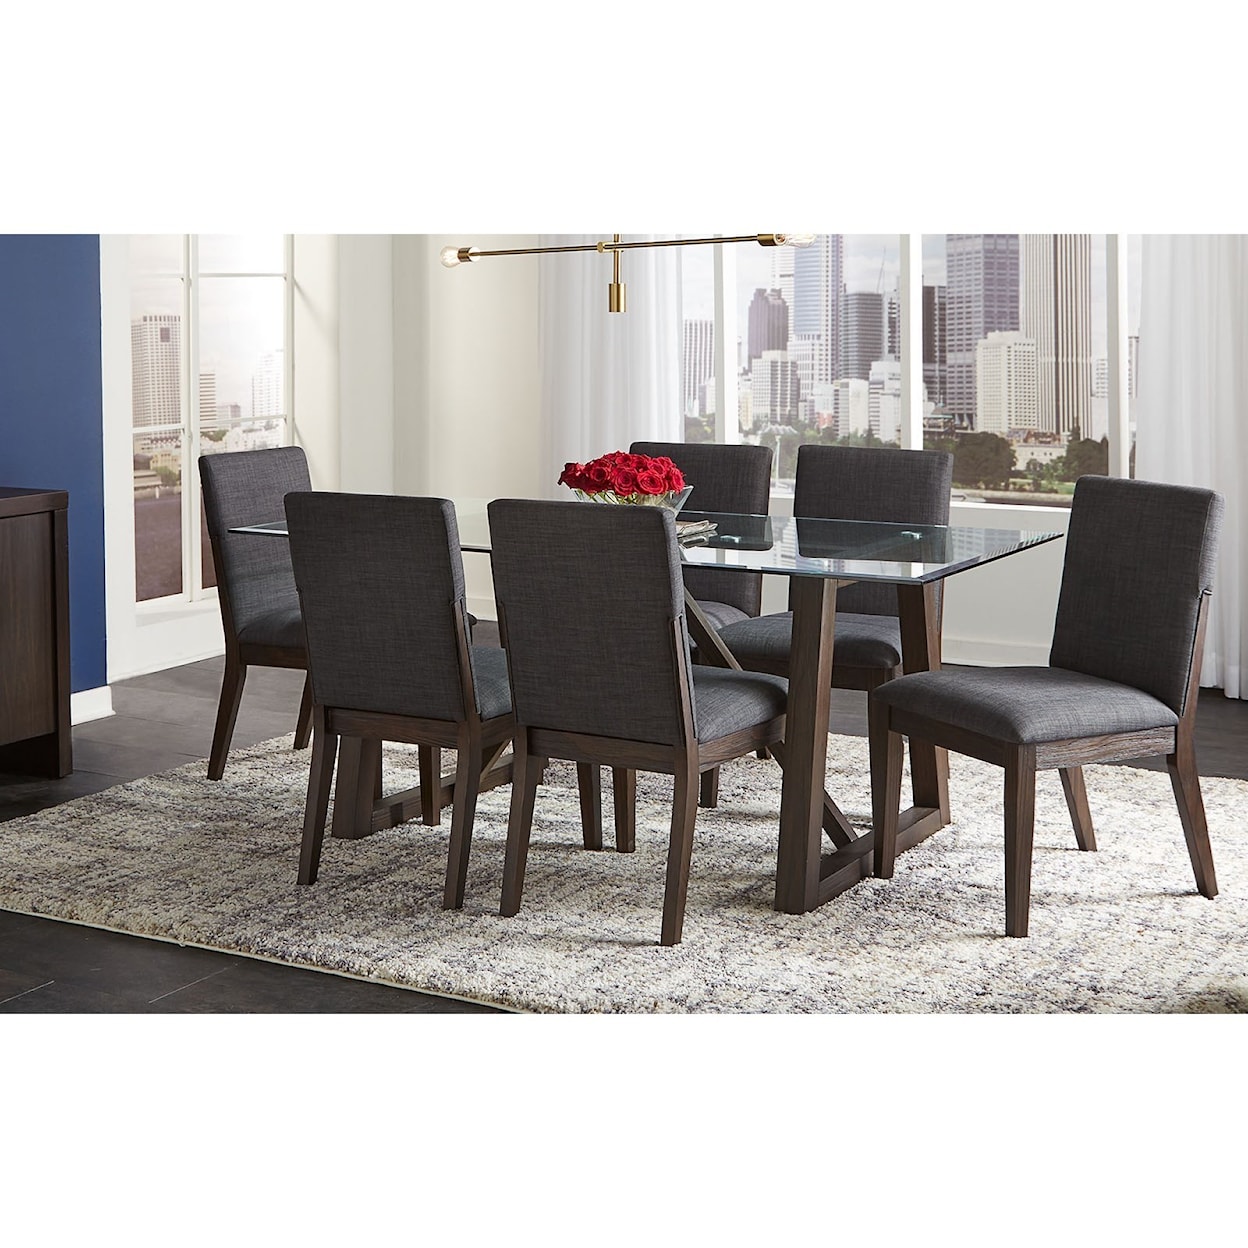 AAmerica Palm Canyon Formal Dining Room Group